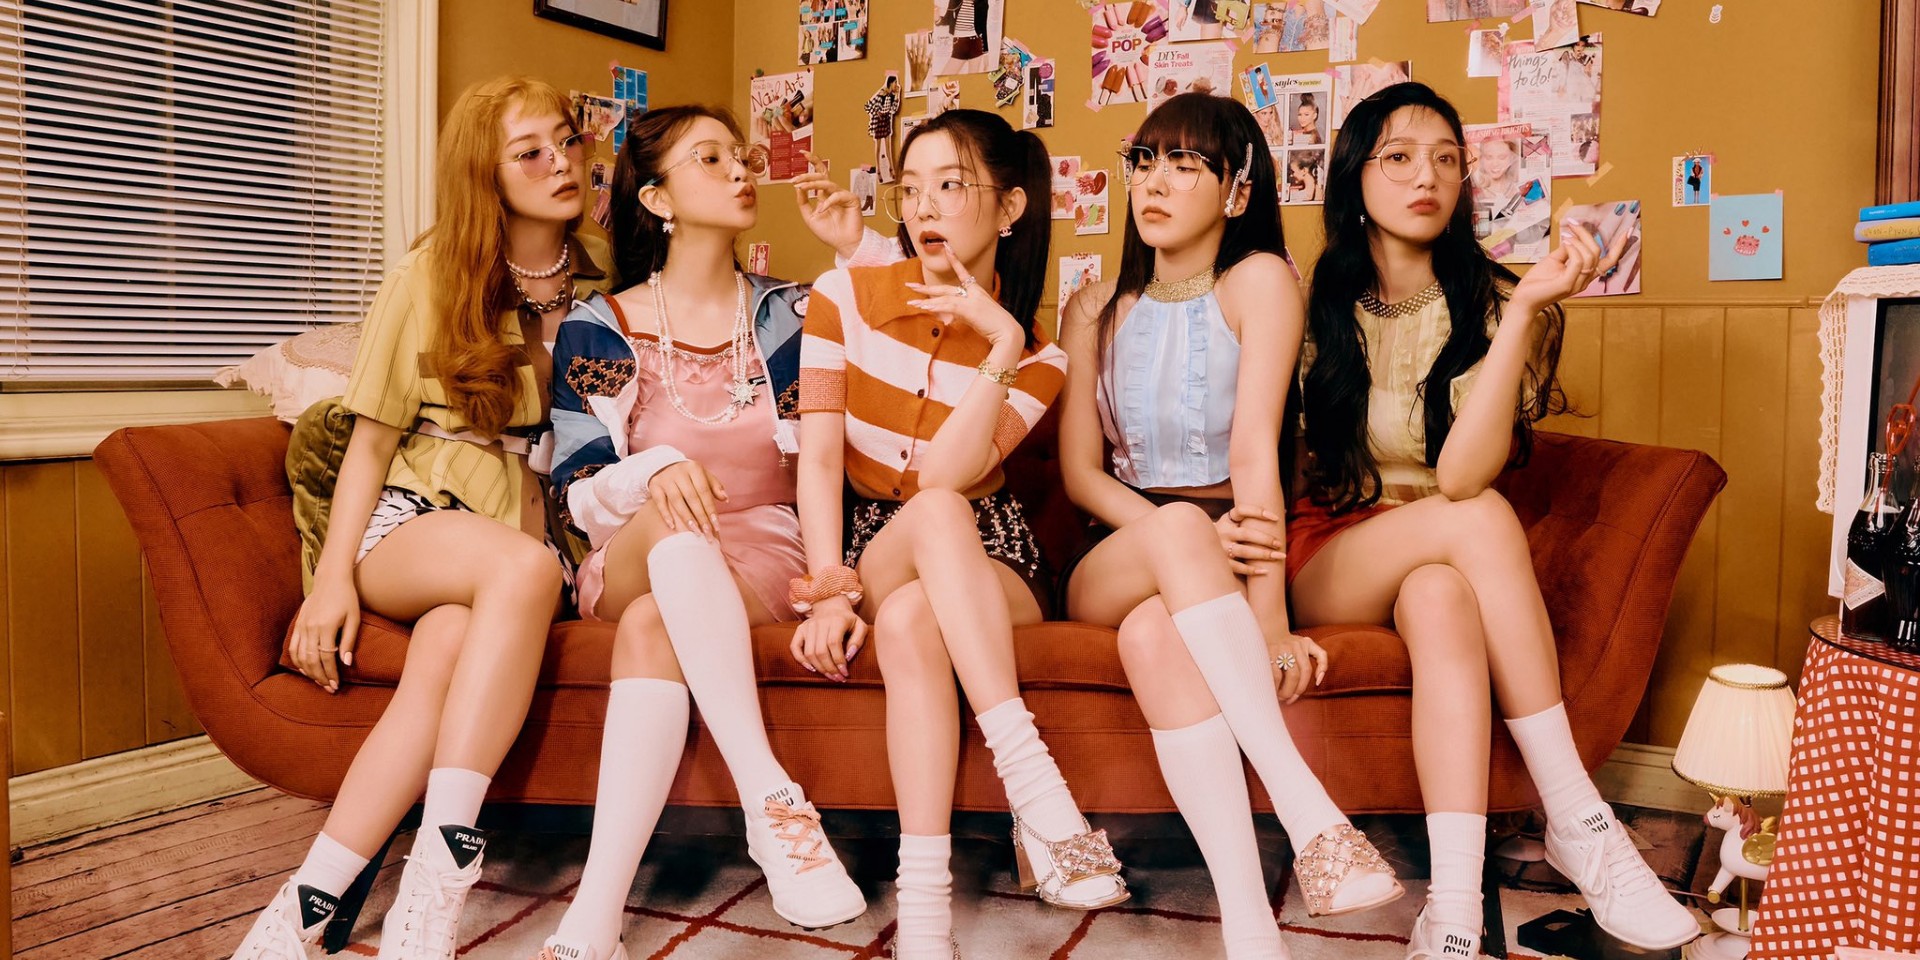 Red Velvet return with new album and music video for 'Queendom' - watch